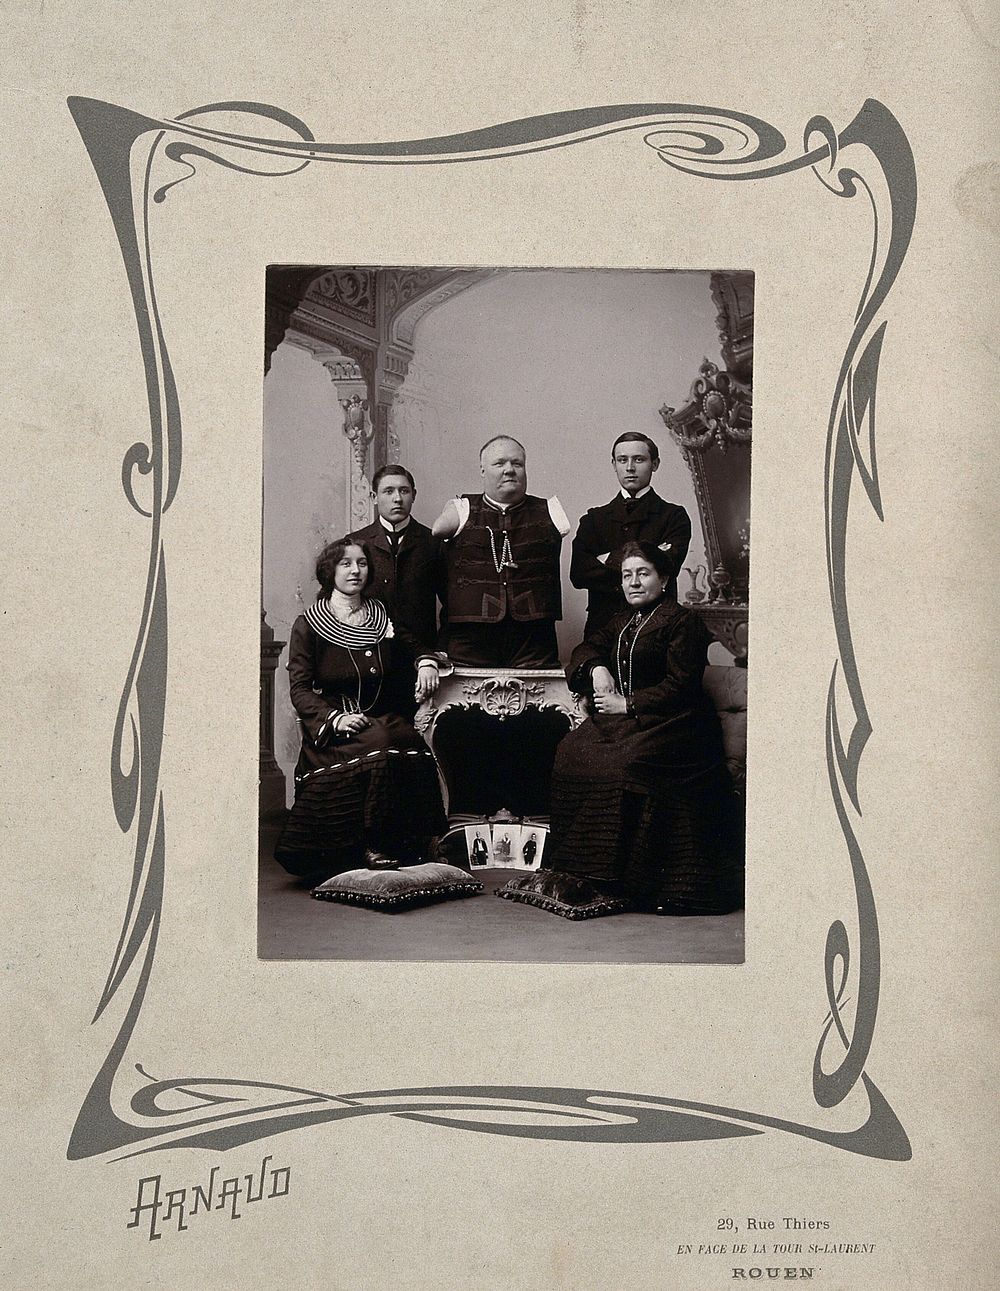 A family portrait: a man without arms and legs poses on a table surrounded by family.